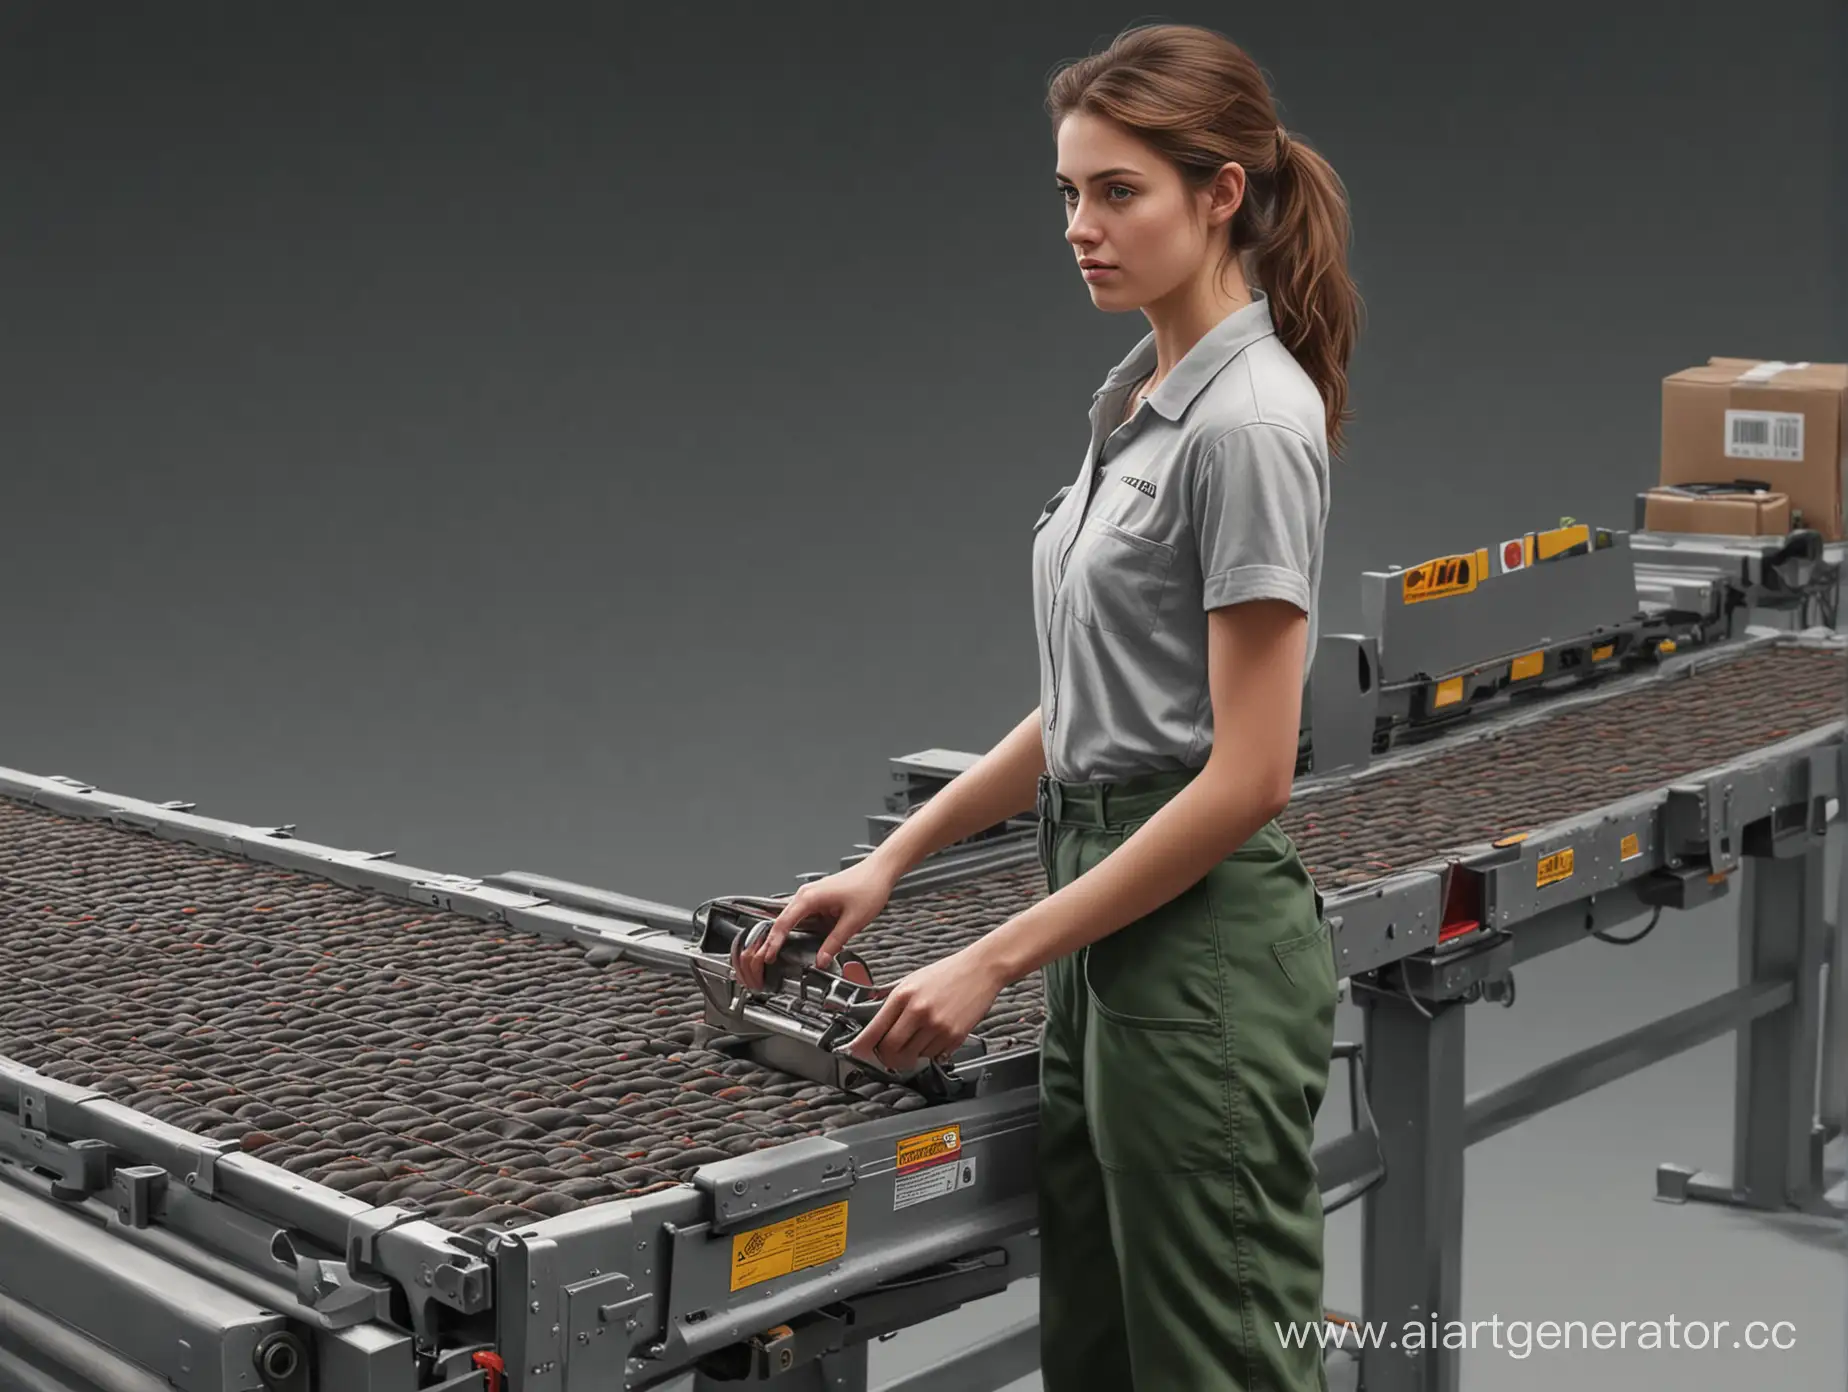 Female-Packer-in-Work-Clothes-at-Conveyor-Line-with-Realistic-Goods-Production